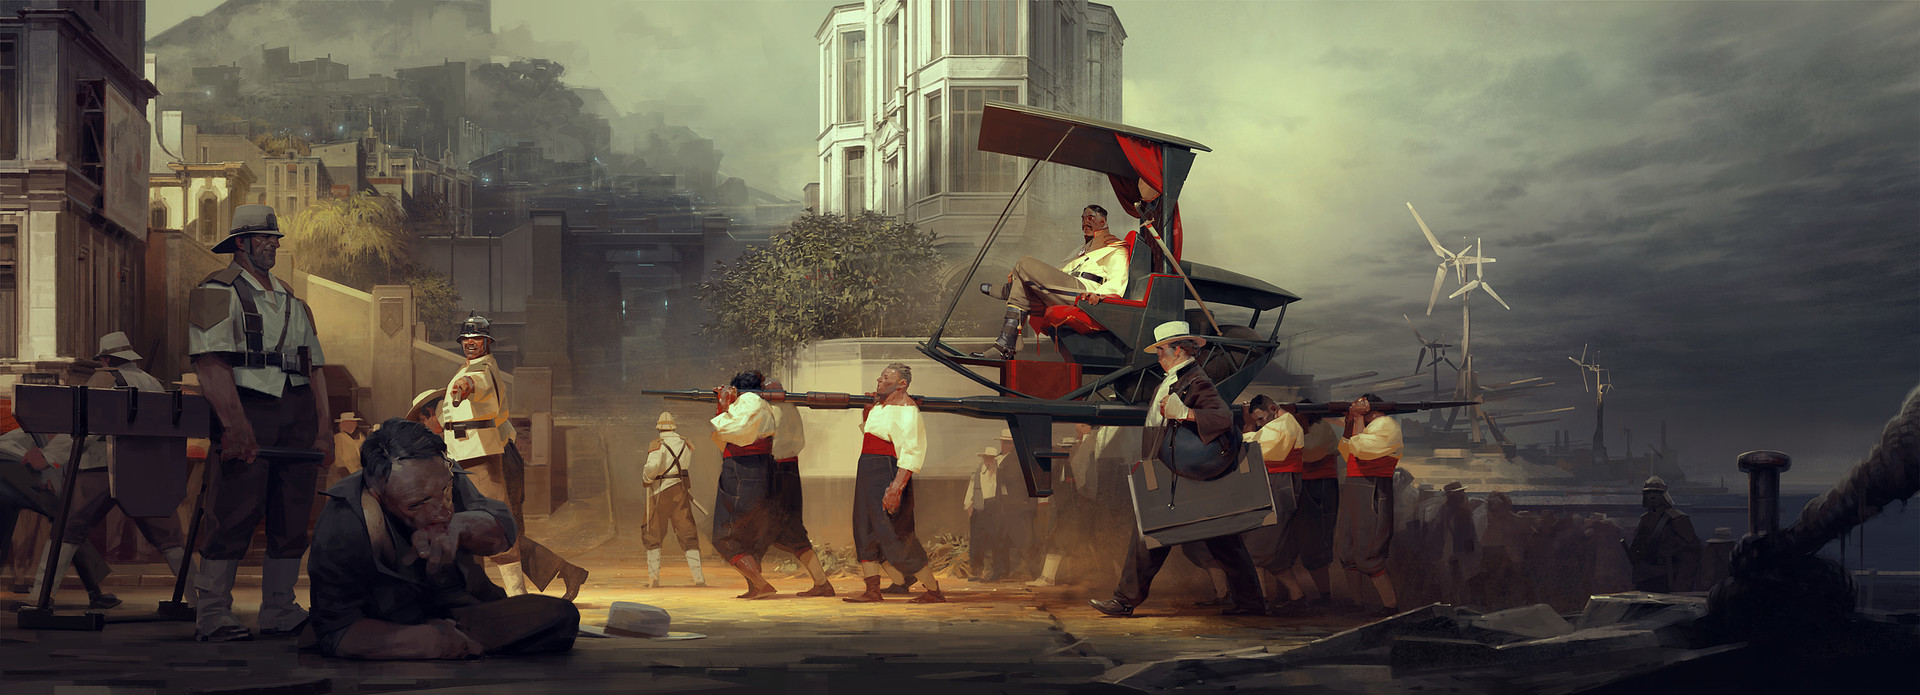 Fine Art: The Art Of Dishonored 2